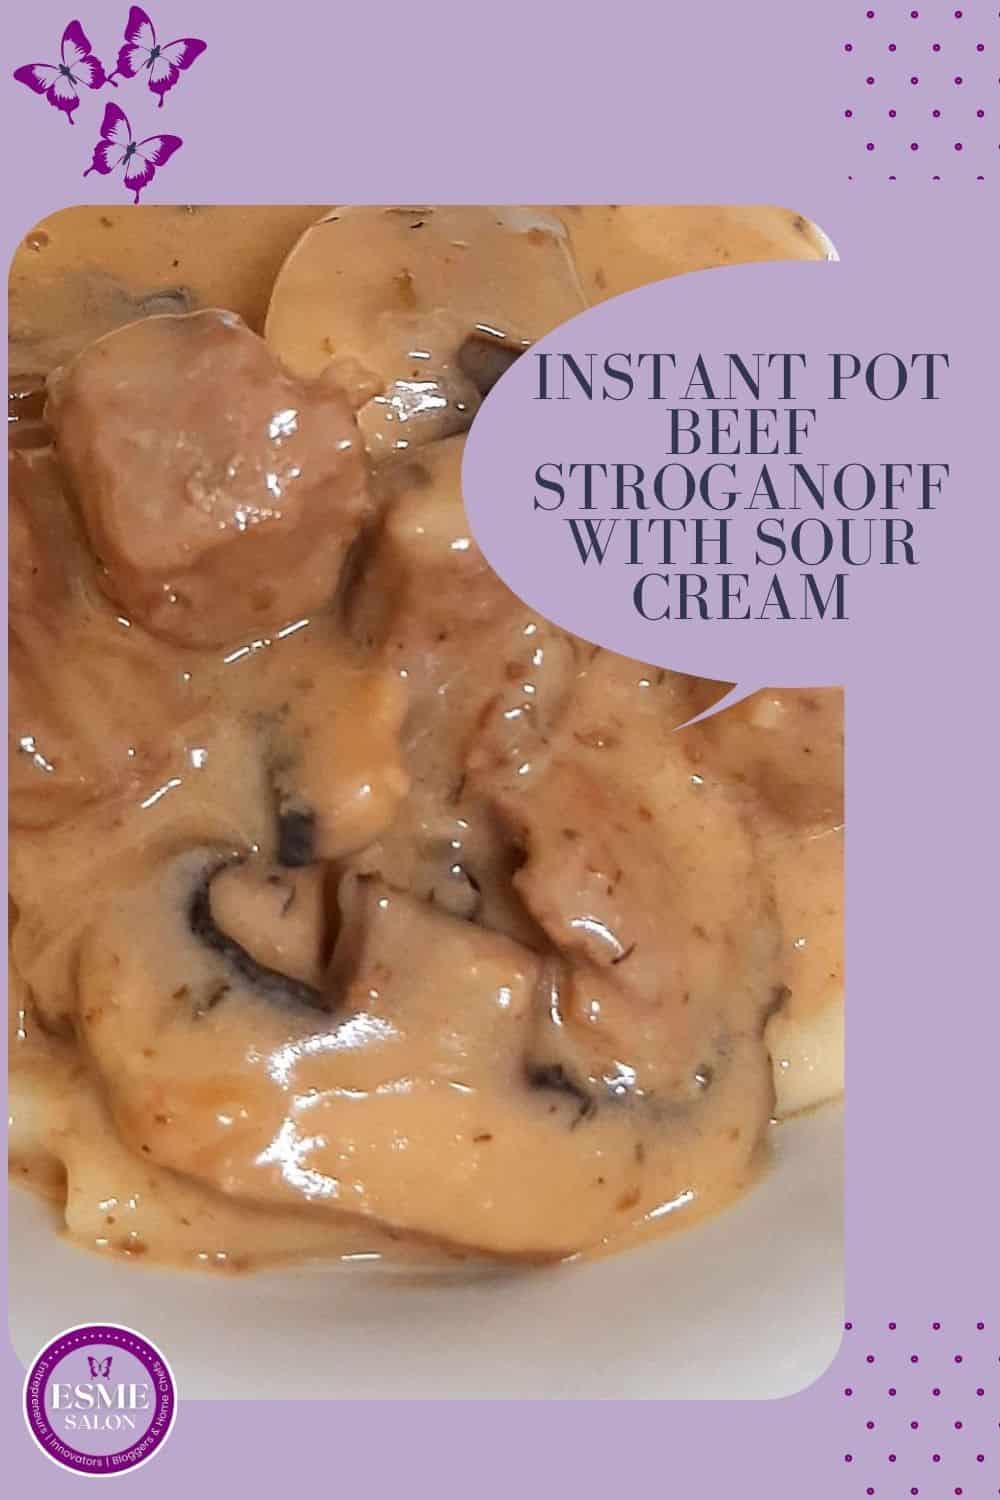 A plate of Instant Pot Beef Stroganoff with Sour Cream